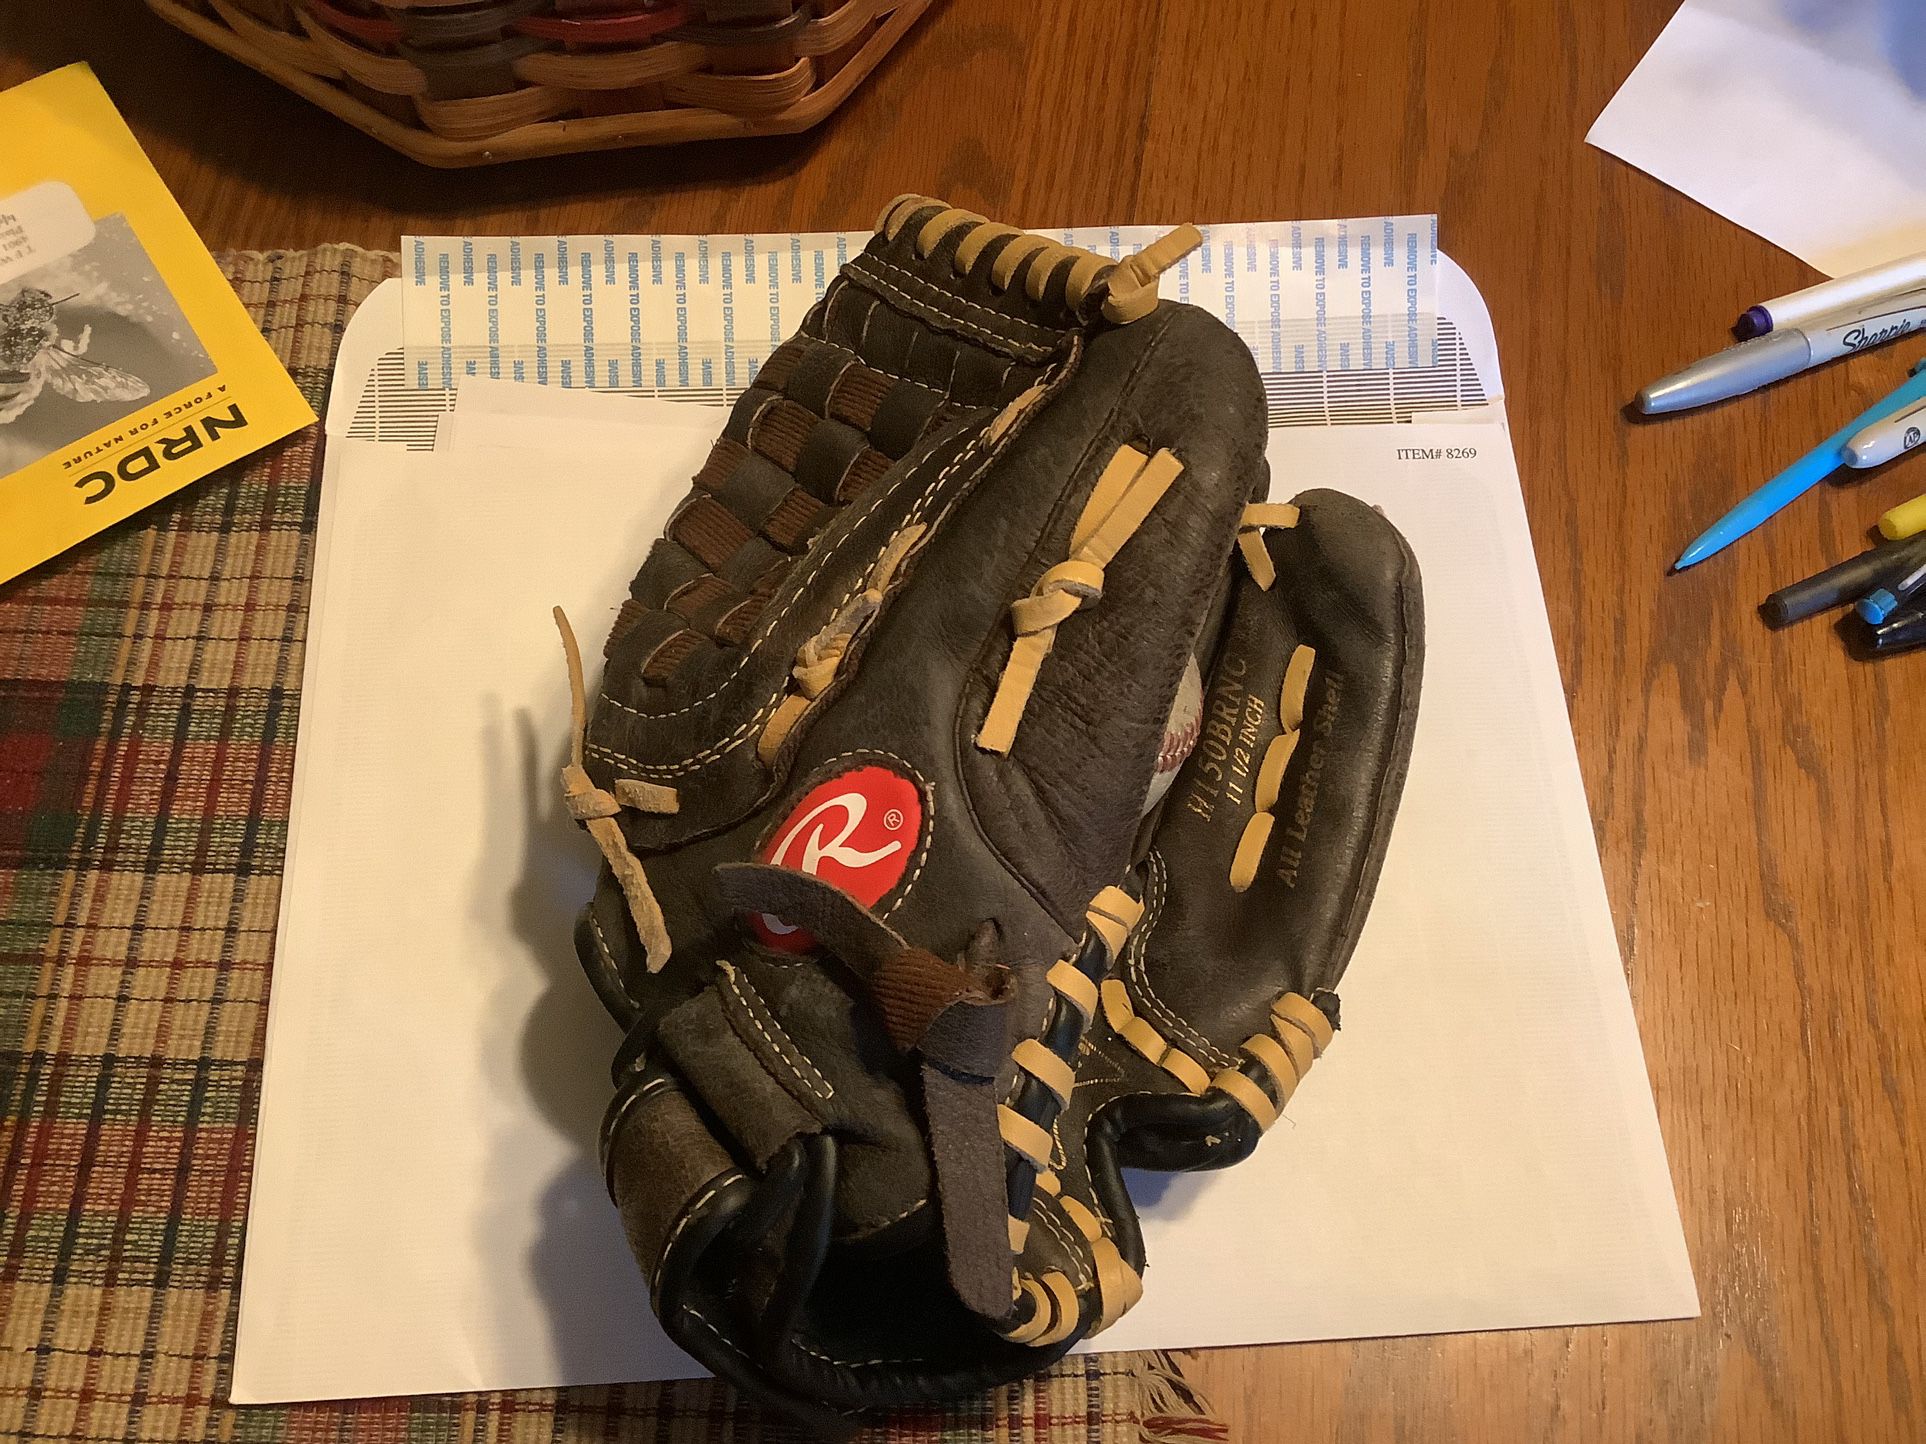 Rawlings Highlight baseball glove 11.5” excellent condition with 2 baseballs